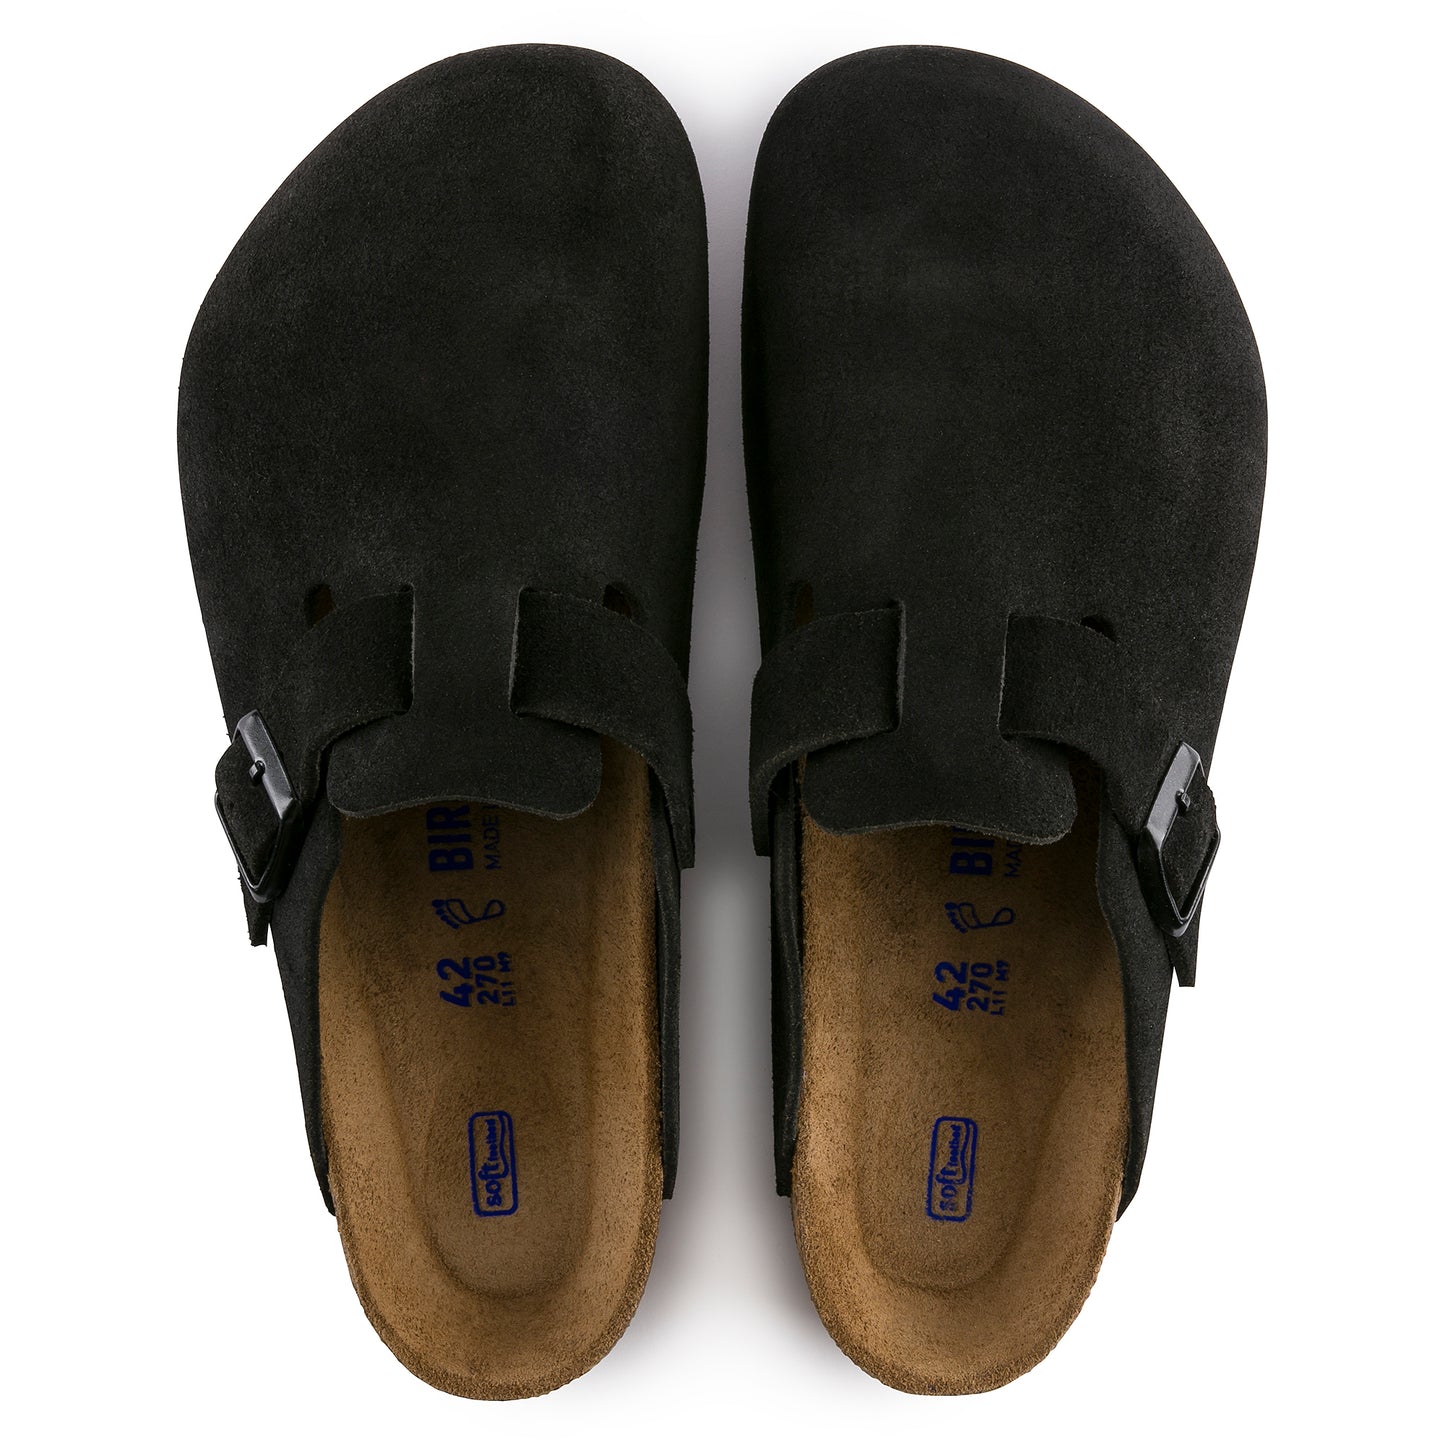 Unisex Boston Soft Footbed Suede Leather Clogs